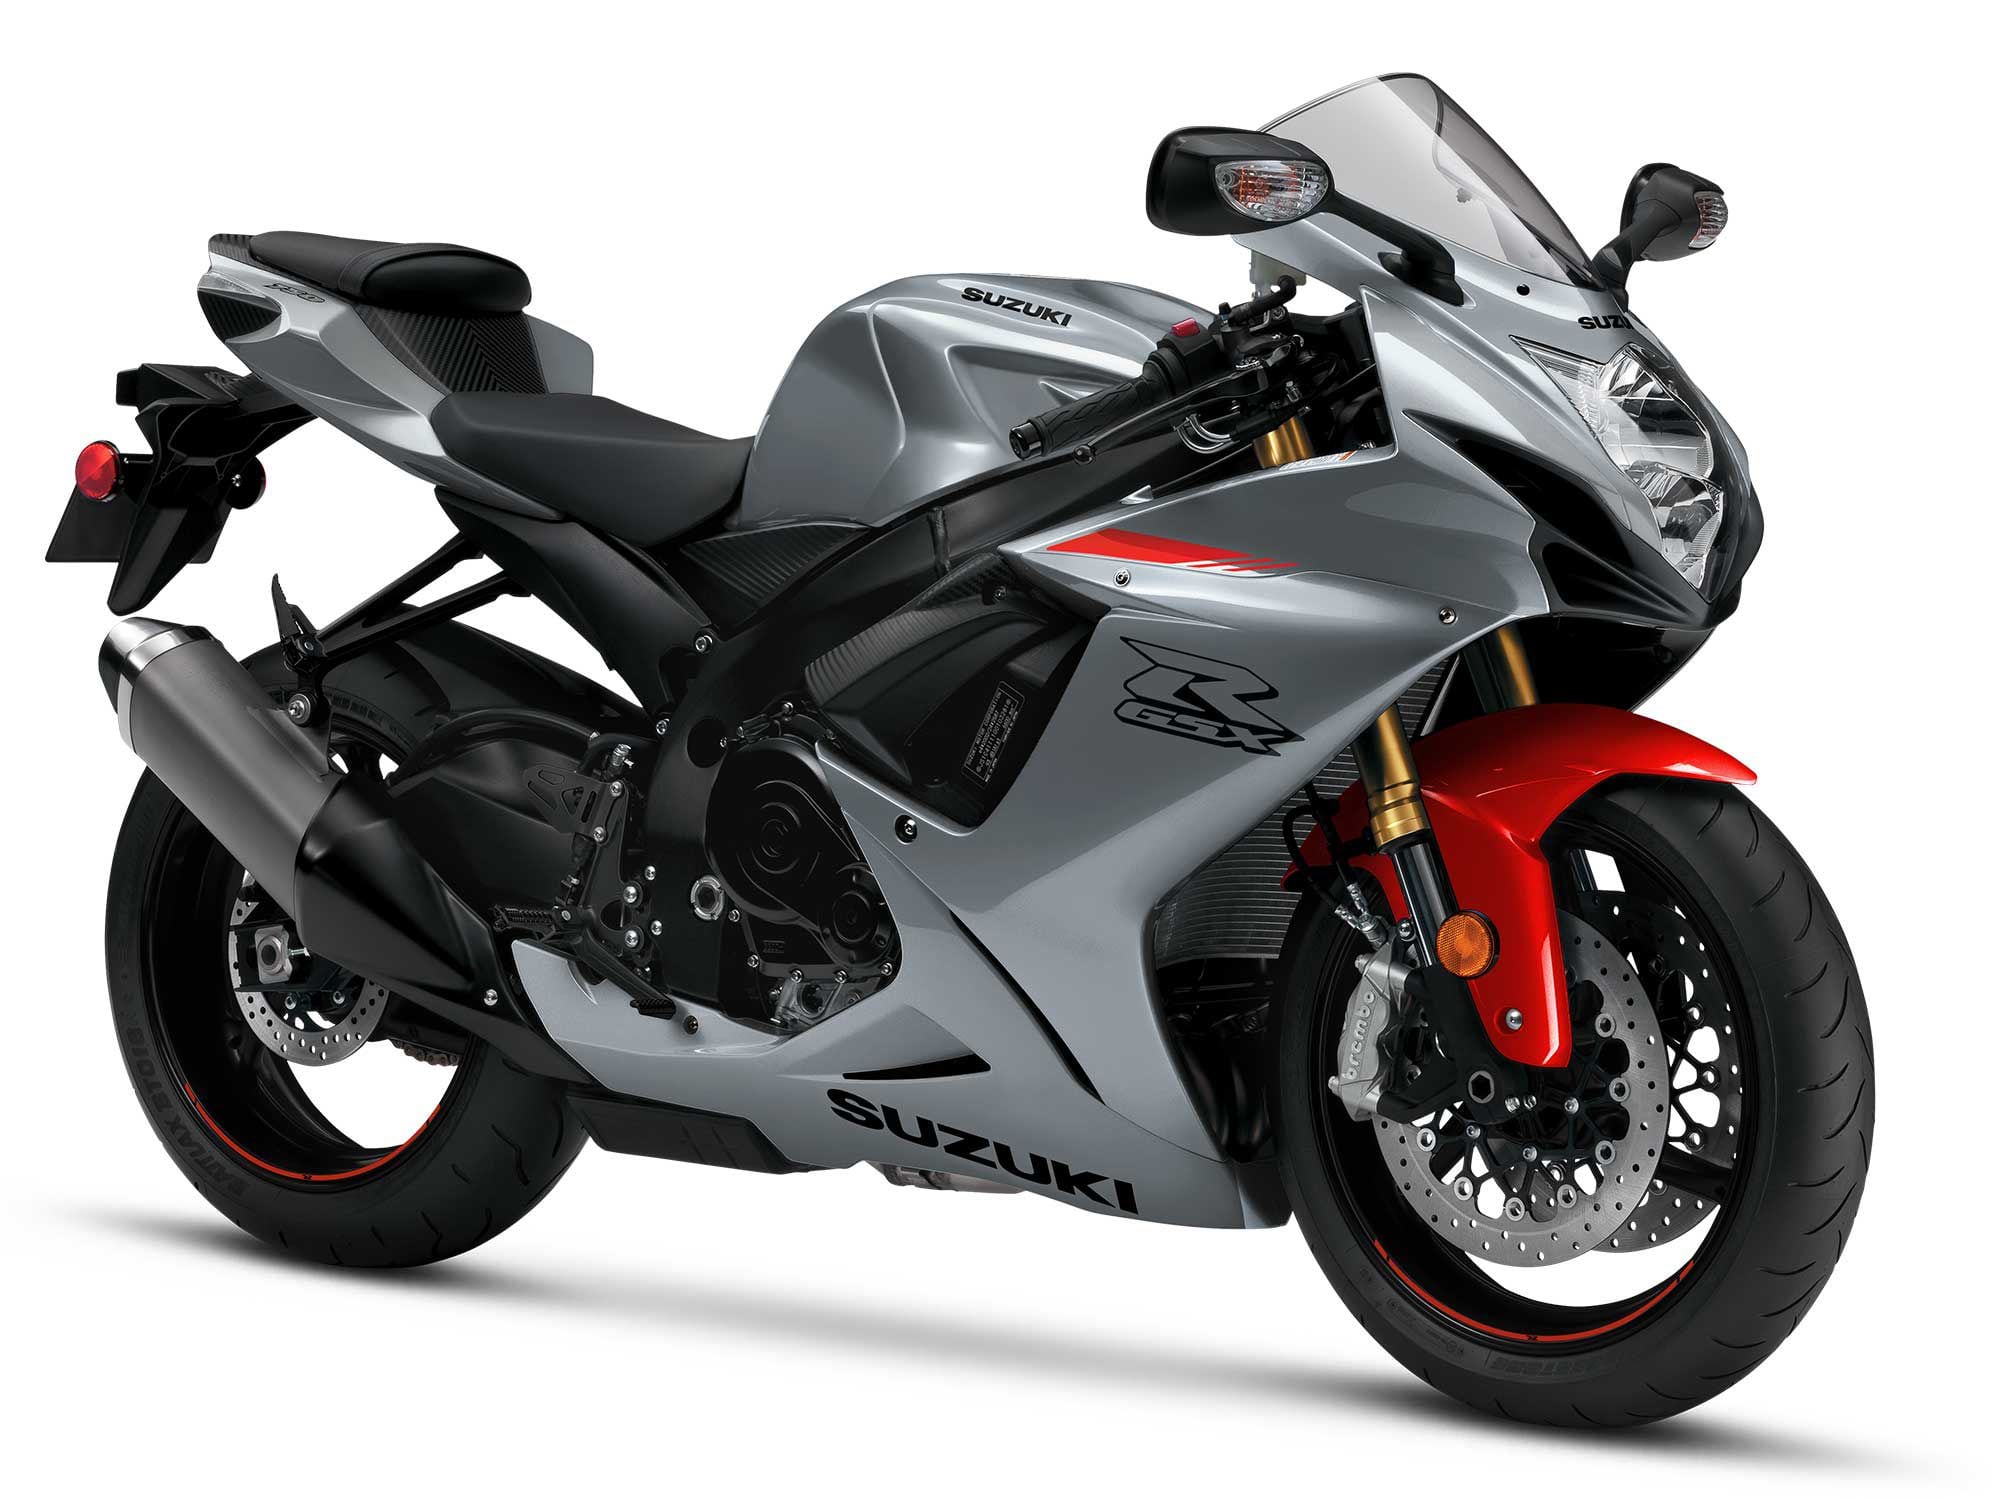 The 2021 GSX-R750 looks familiar, huh? Suzuki surely knows a 10-year-old design does a disservice to its legacy. You just know there’s a contingency inside the factory chomping at the bit to build a new one. Give them the money!